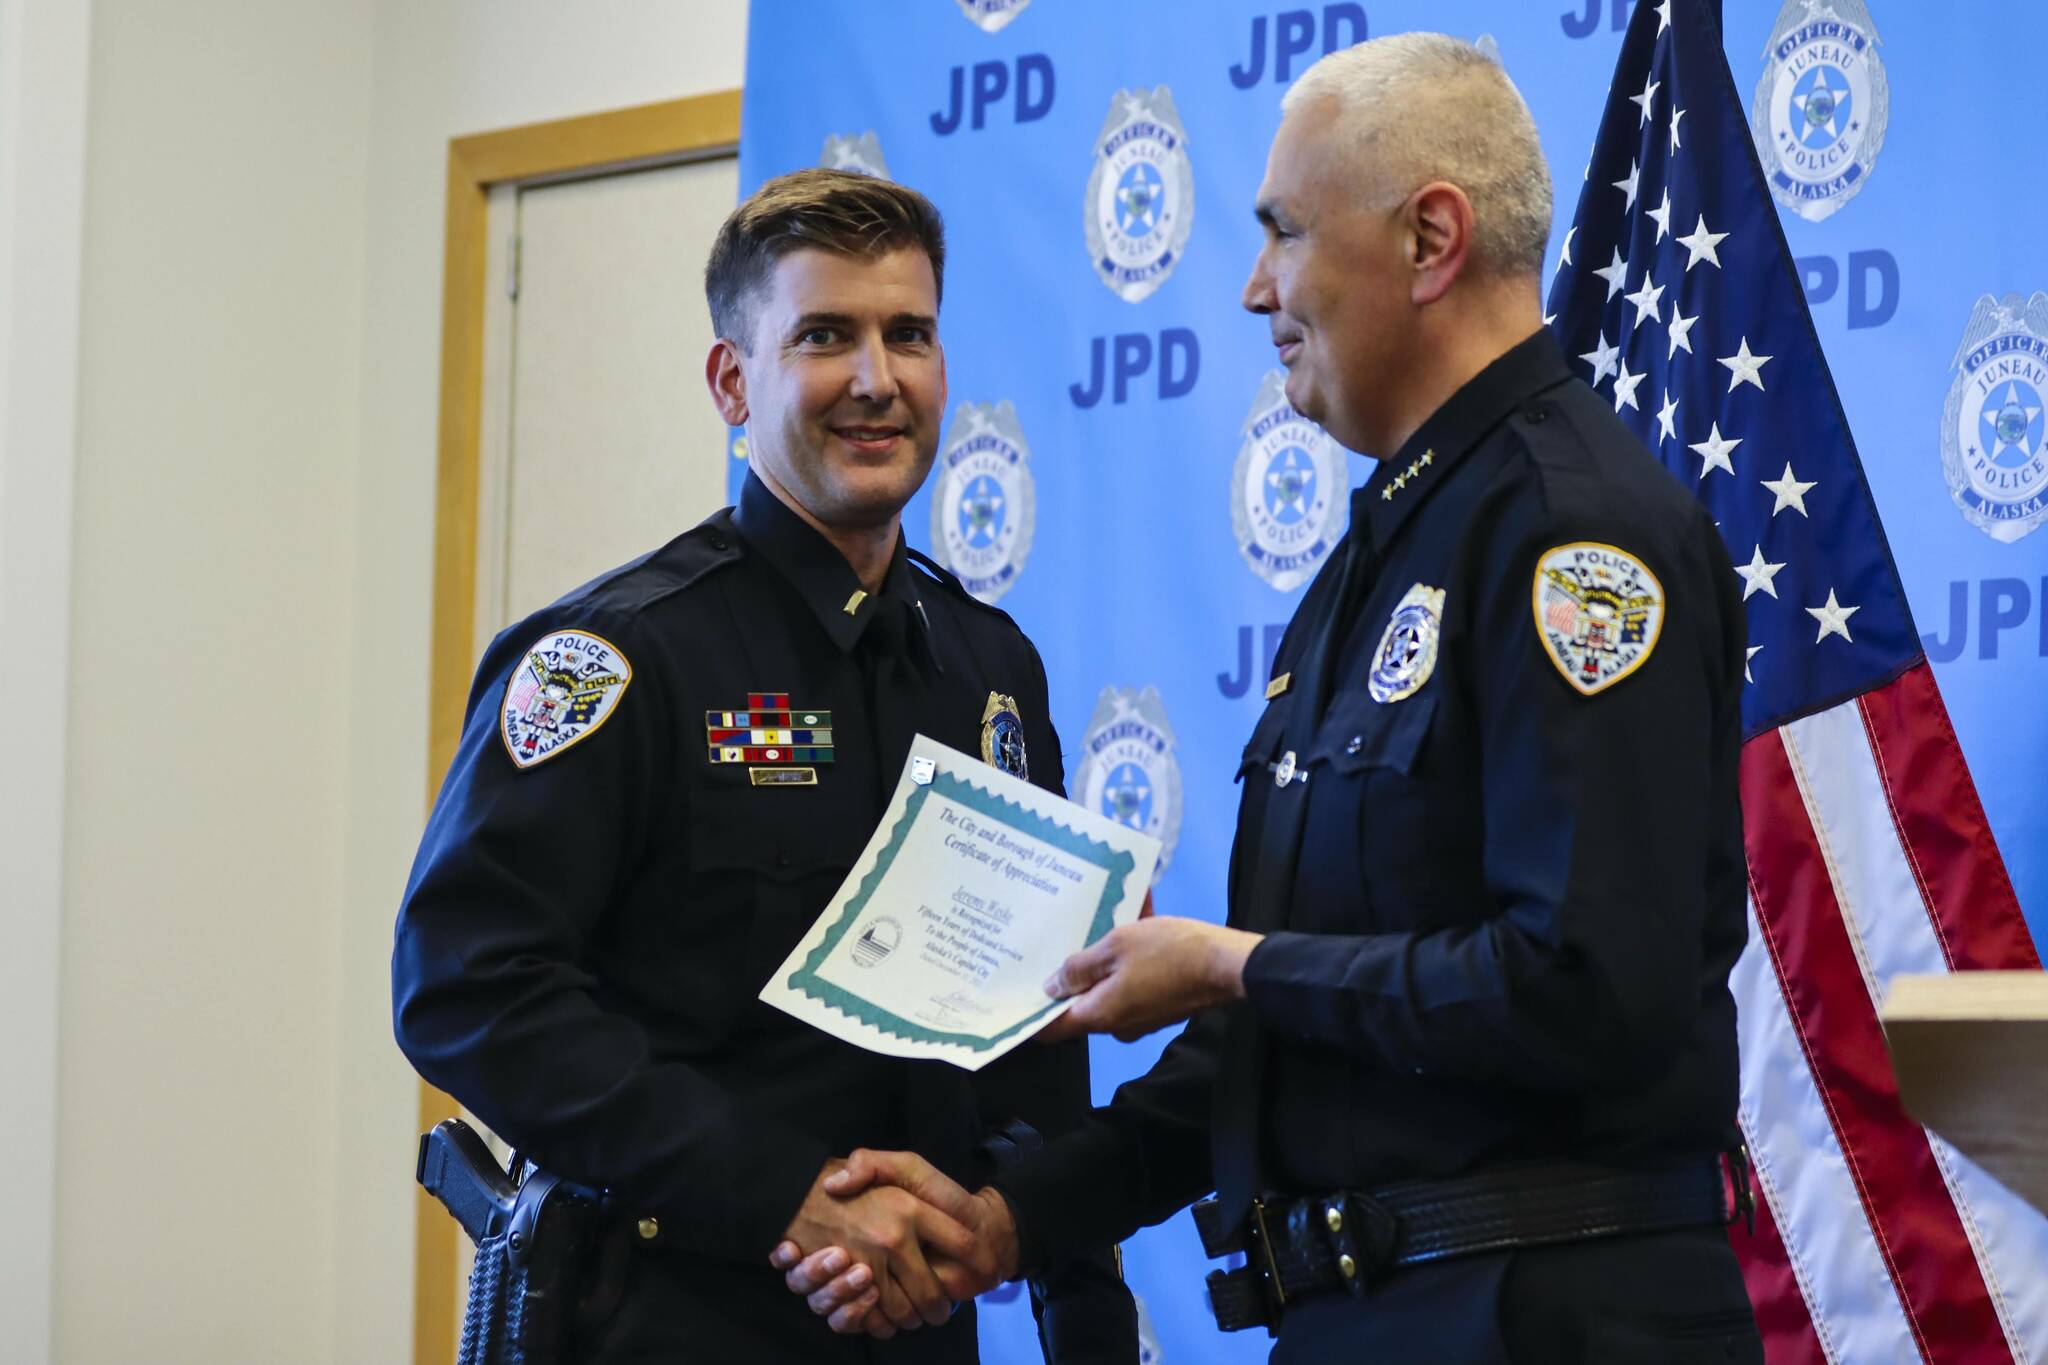 Michael S. Lockett / Juneau Empire 
Chief Ed Mercer presents Lt. Jeremy Weske with a certificate for his 15 years of service during the Juneau Police Department’s annual award ceremony on June 9, 2022.